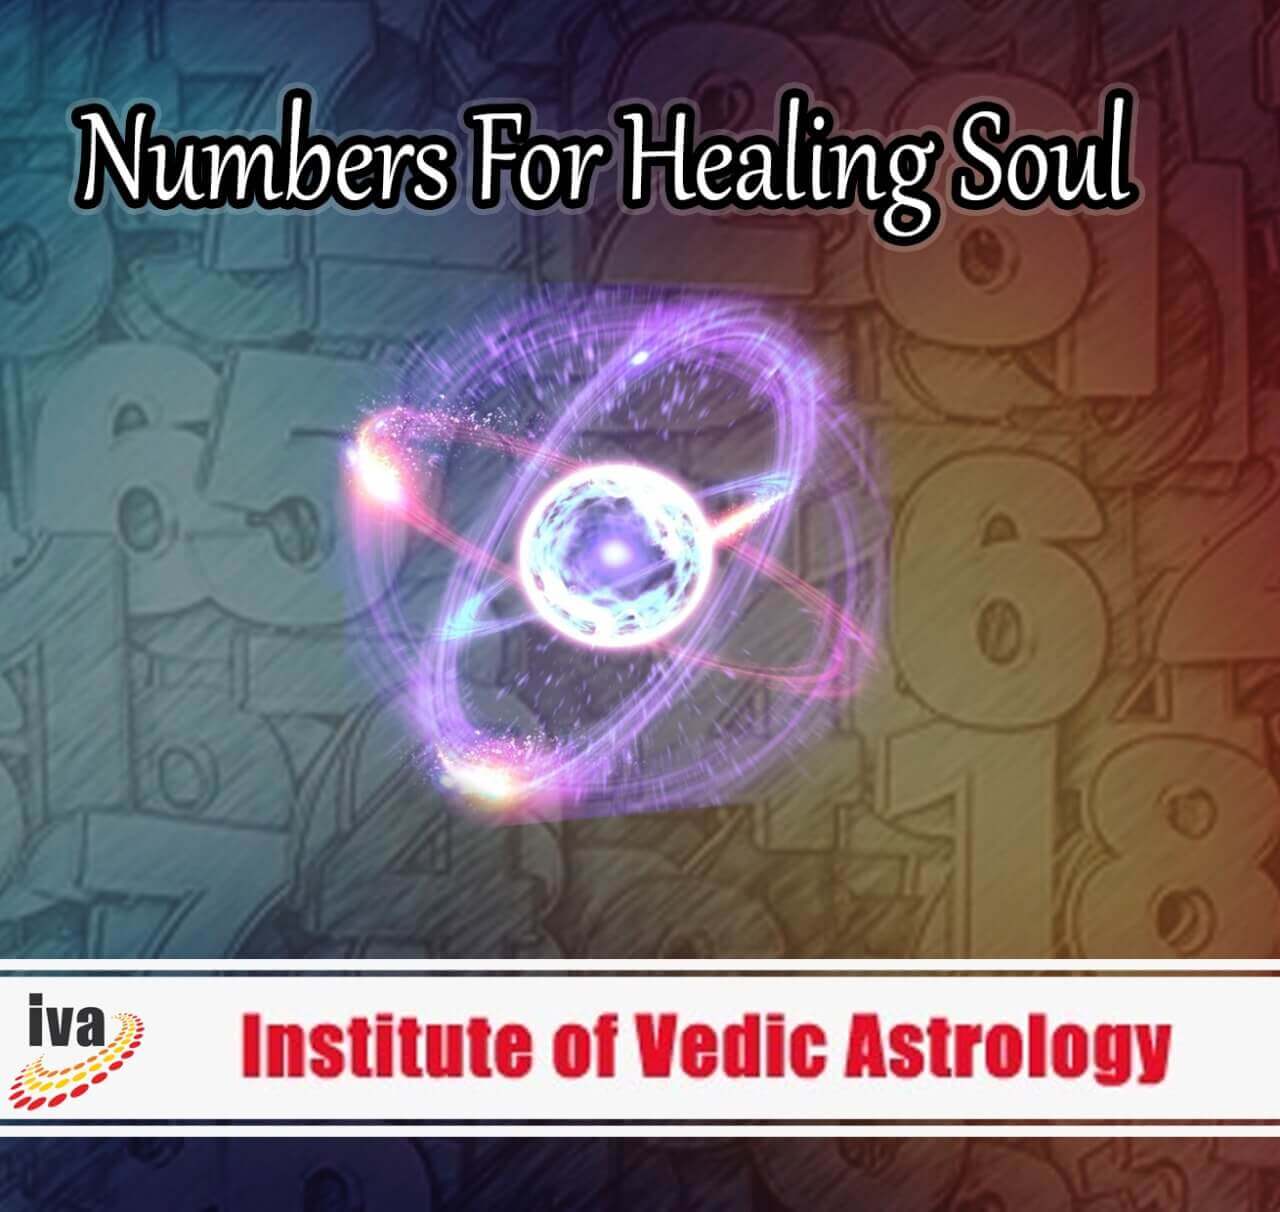 Numbers for healing soul